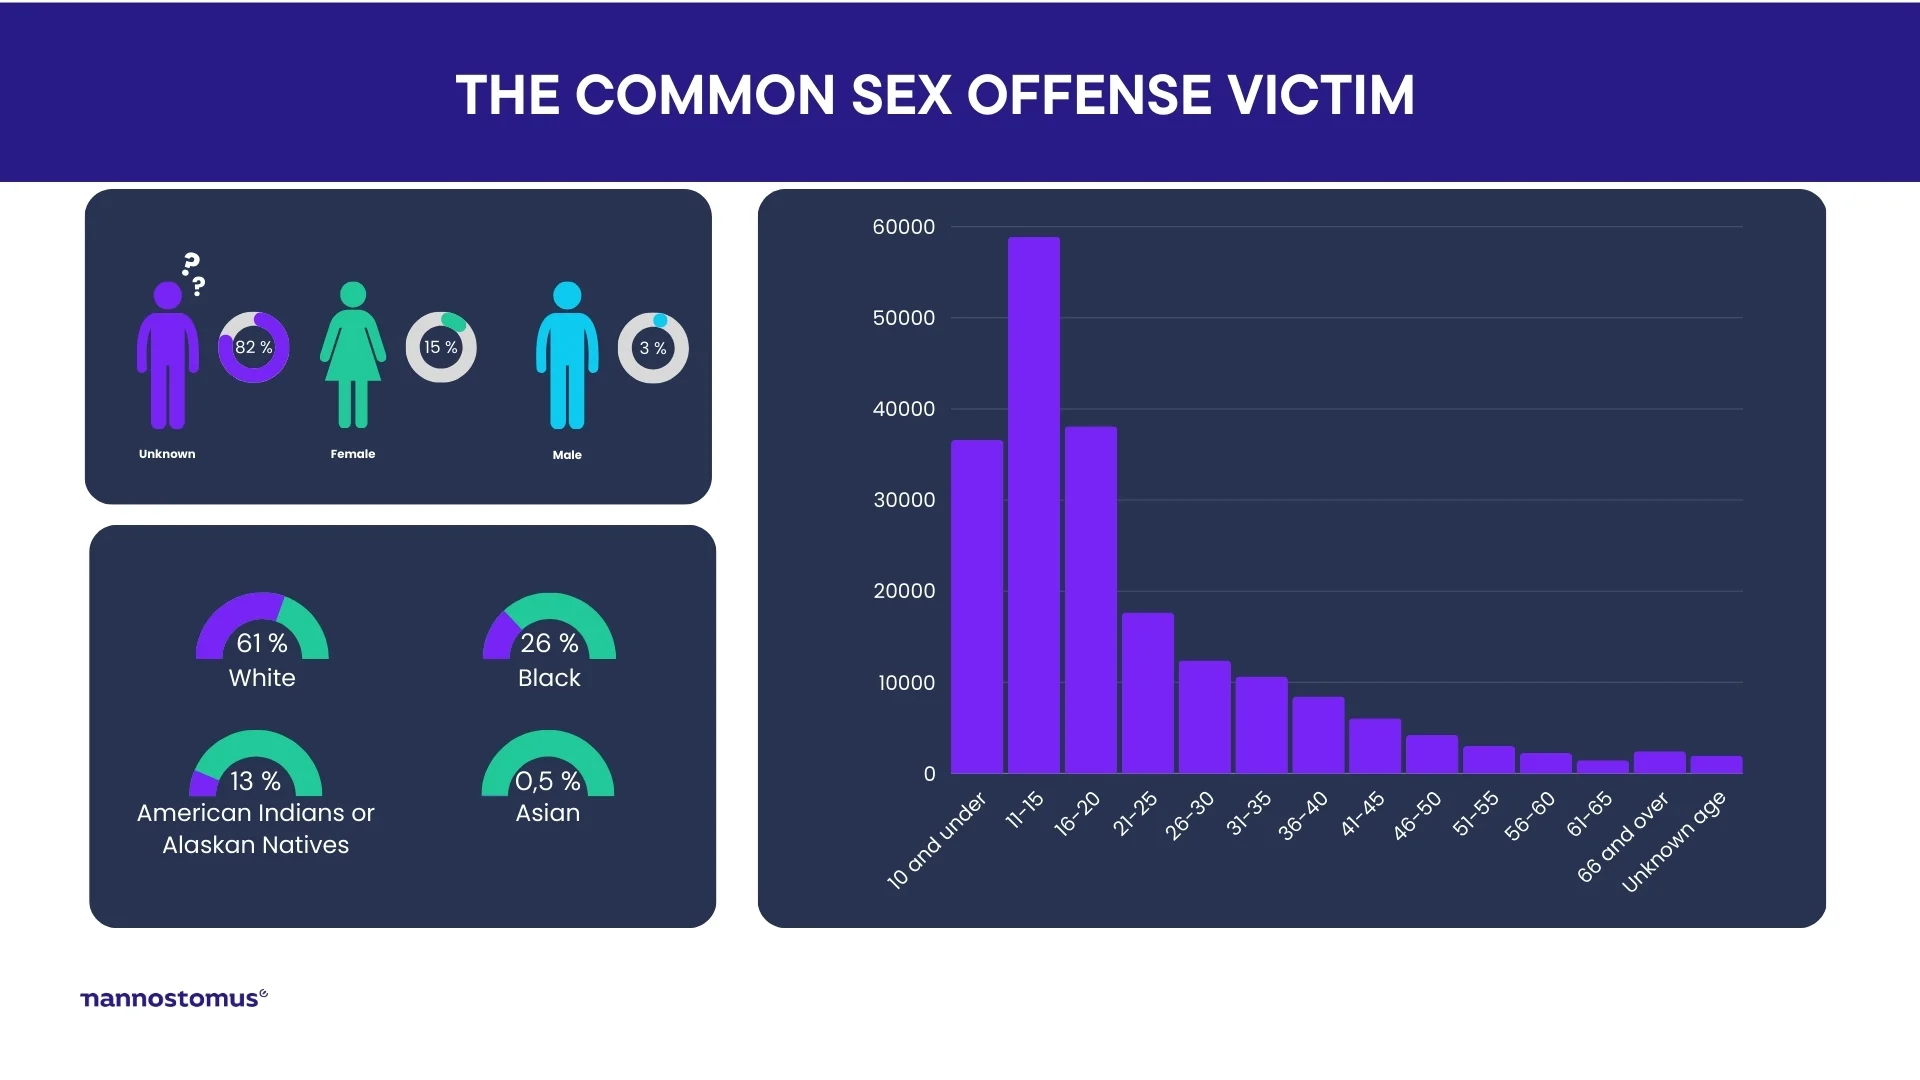 Sexual offenders information in statistics